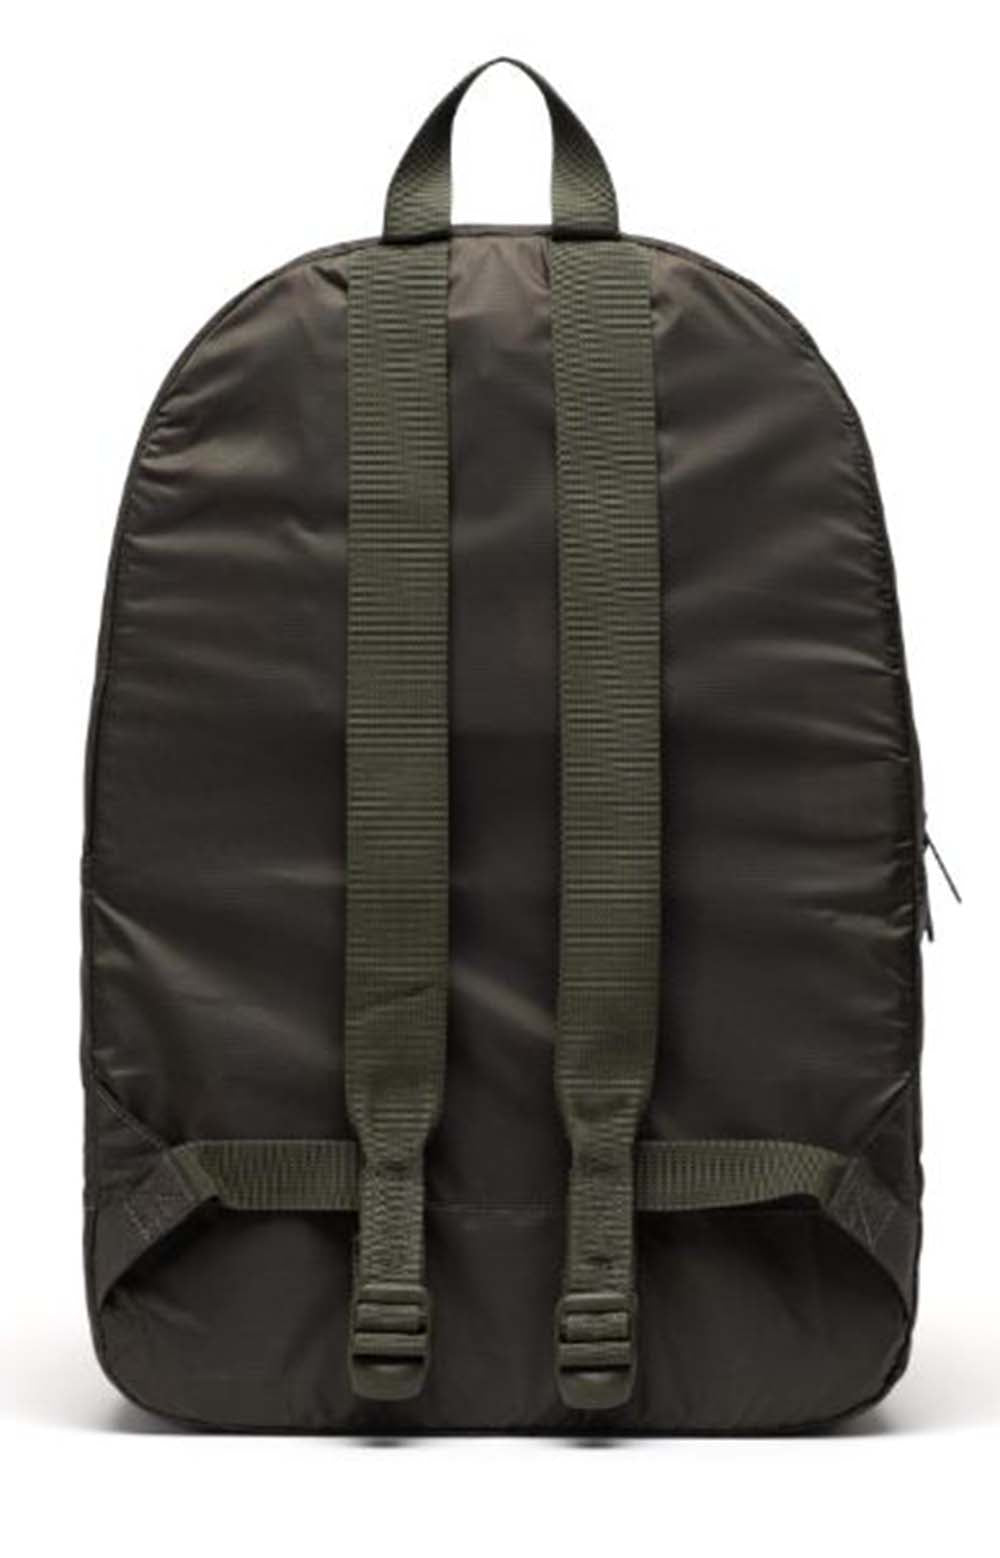 Packable Daypack - Ivy Green